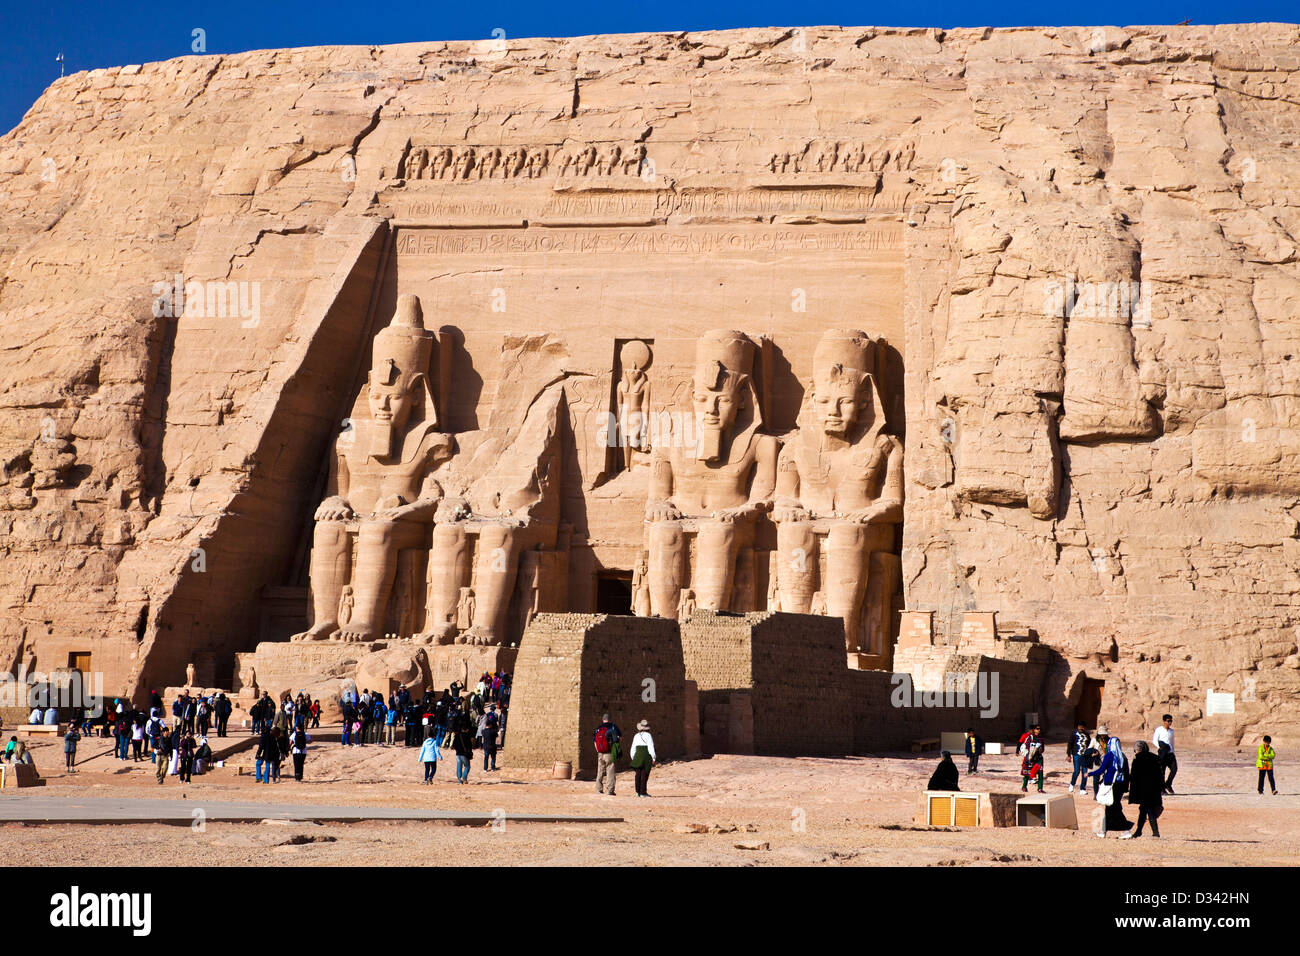 Tourists at the famous site of the Great Temple at Abu Simbel, Egypt are dwarfed by the huge statues of Ramesses II Stock Photo